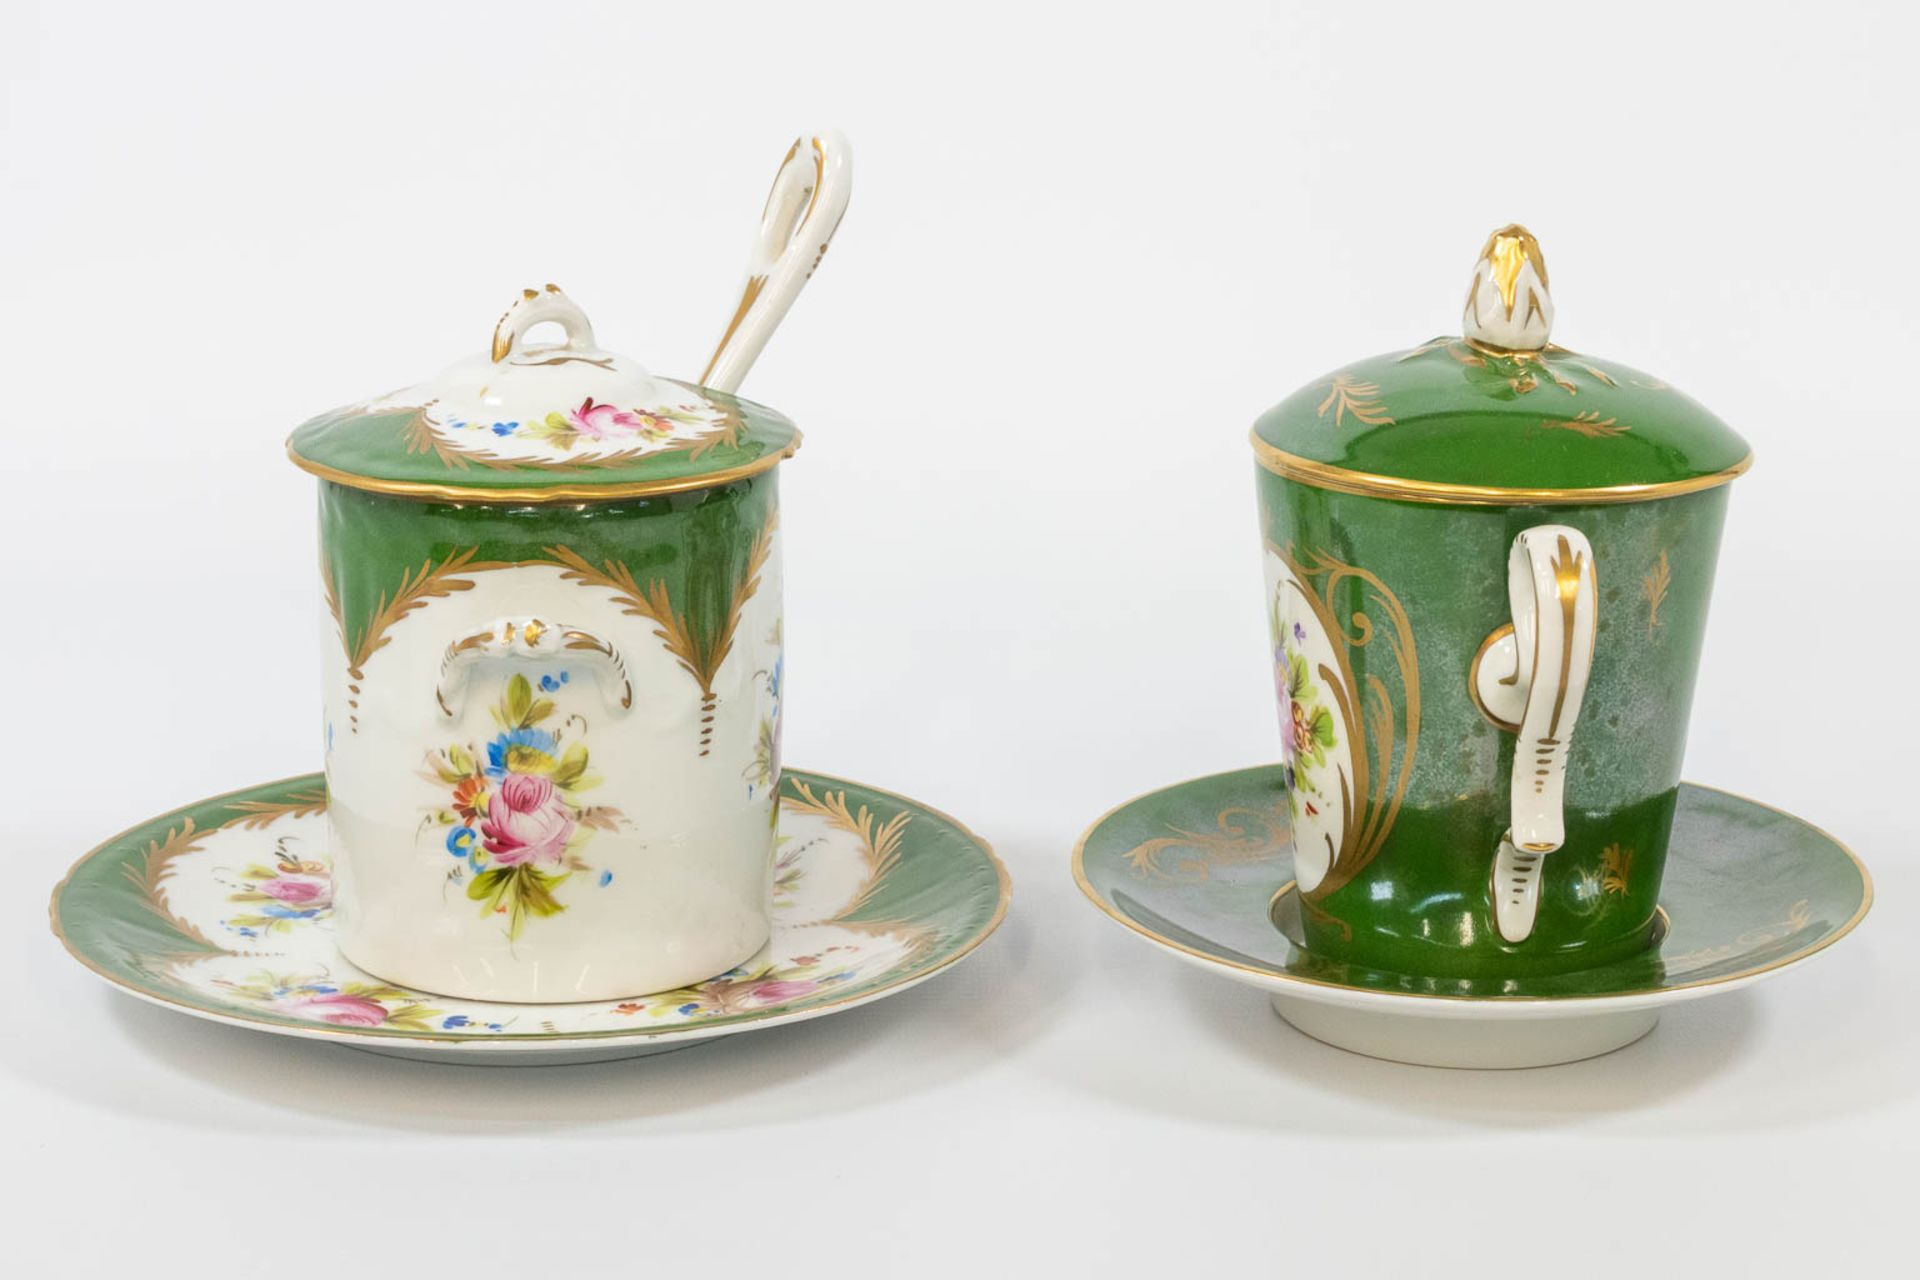 A tremble cup and sugarpot, made of hand-painted porcelain with a flower decor and marked JD Limoges - Image 7 of 11